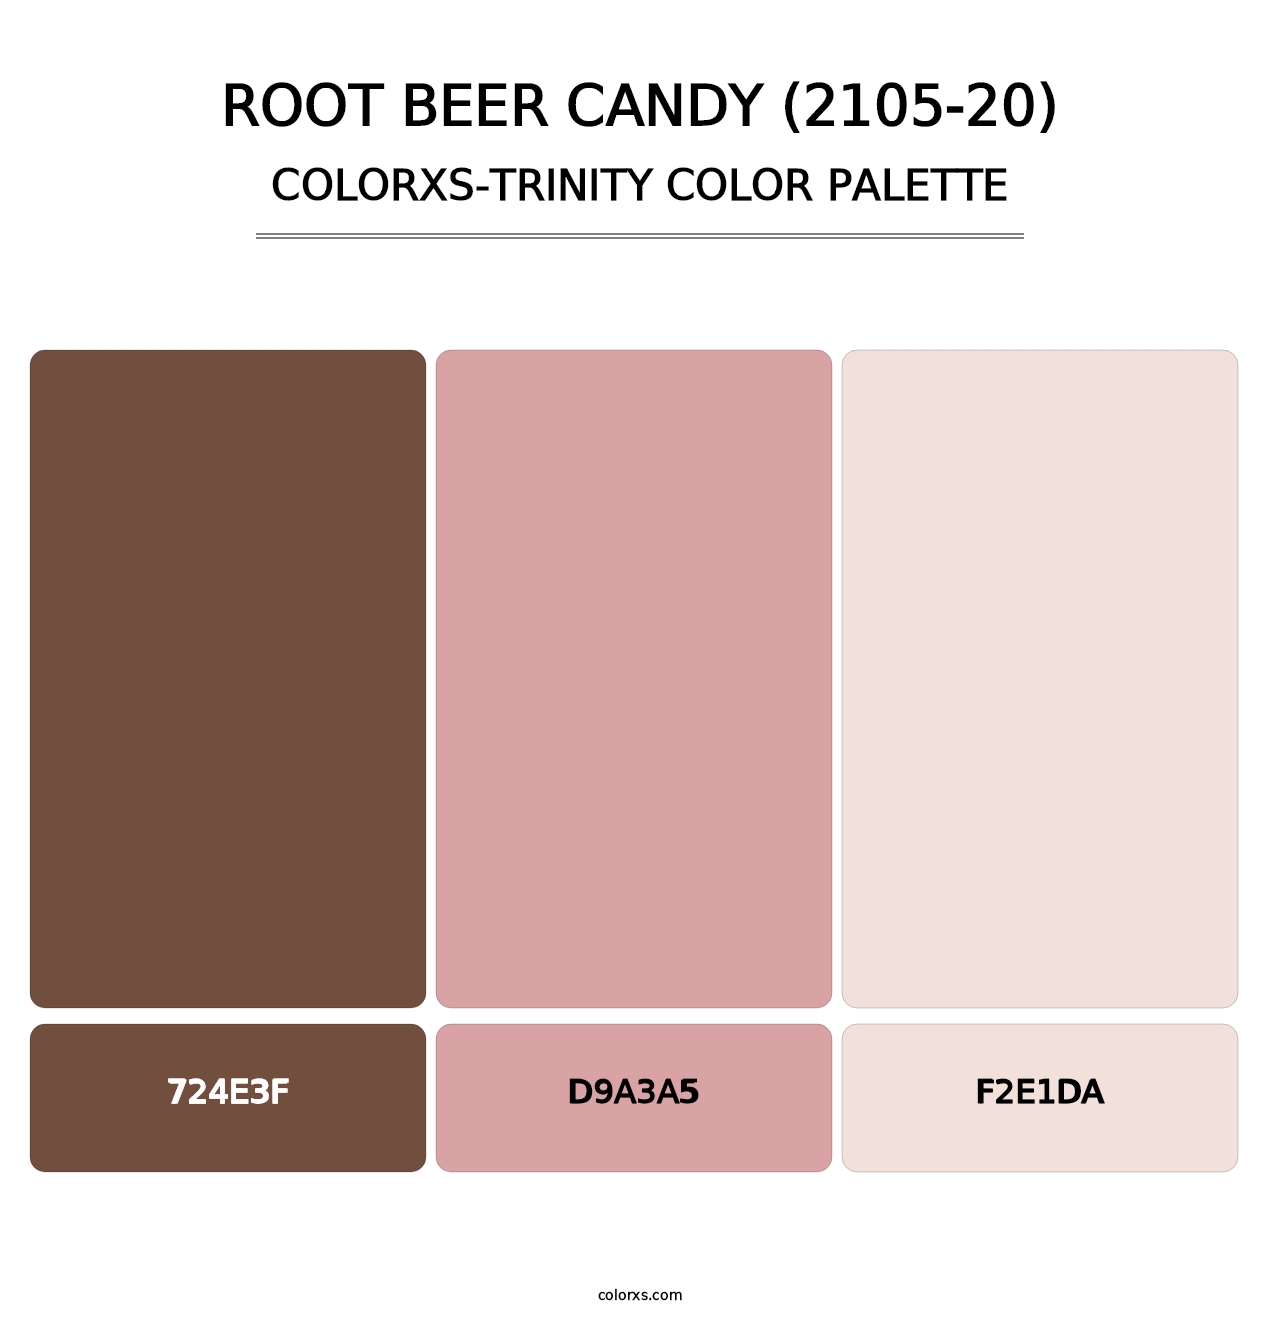 Root Beer Candy (2105-20) - Colorxs Trinity Palette